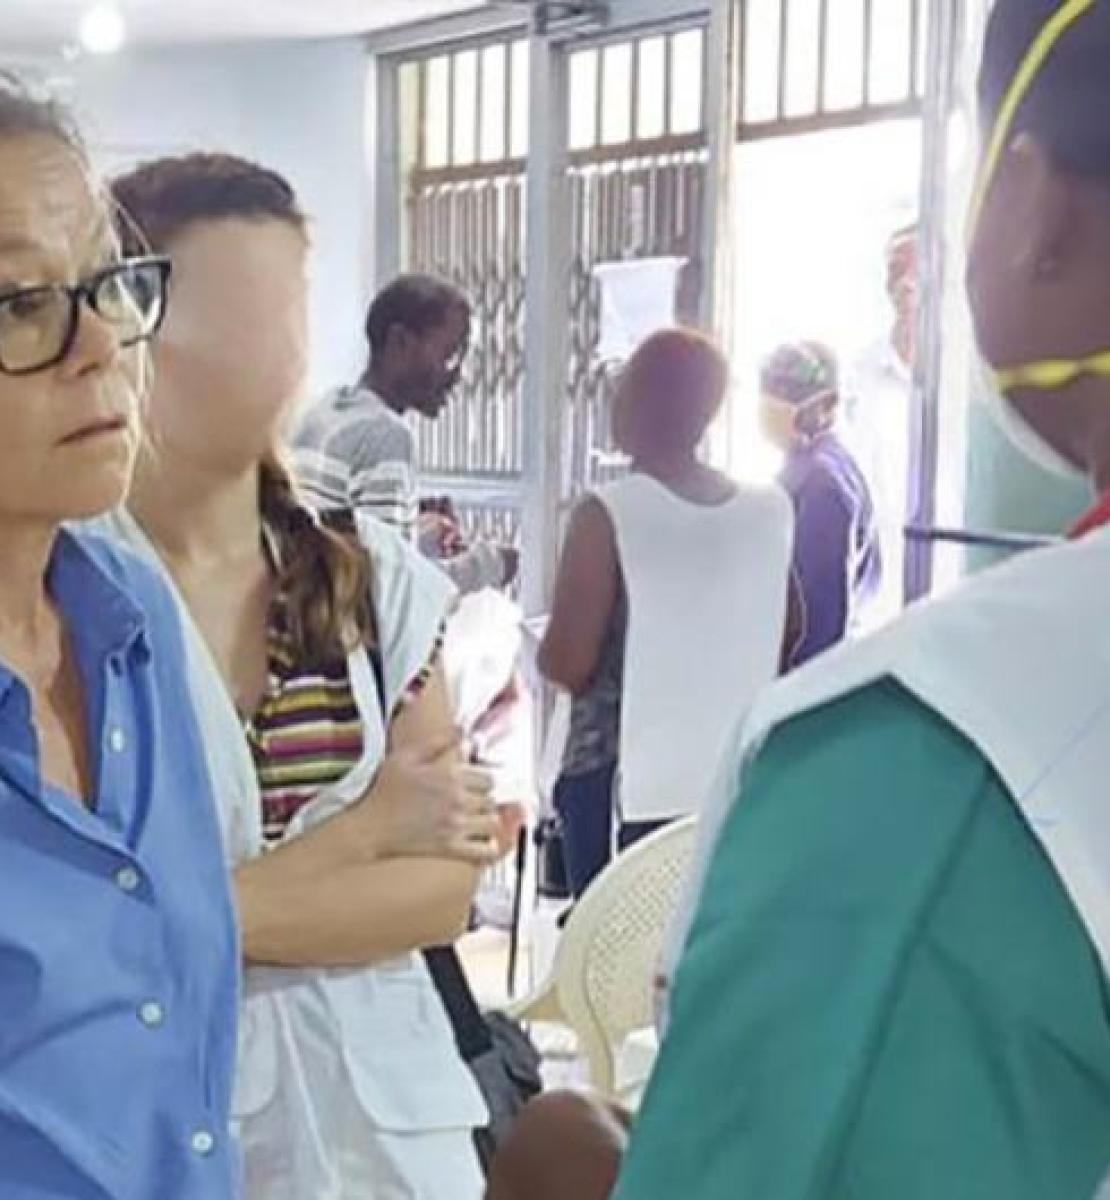 In a hospital in Haiti, a woman wearing a blue blouse and glasses talks with a caregiver photographed from behind, wearing a white gown and a respirator mask. The two women are surrounded by several other people. 